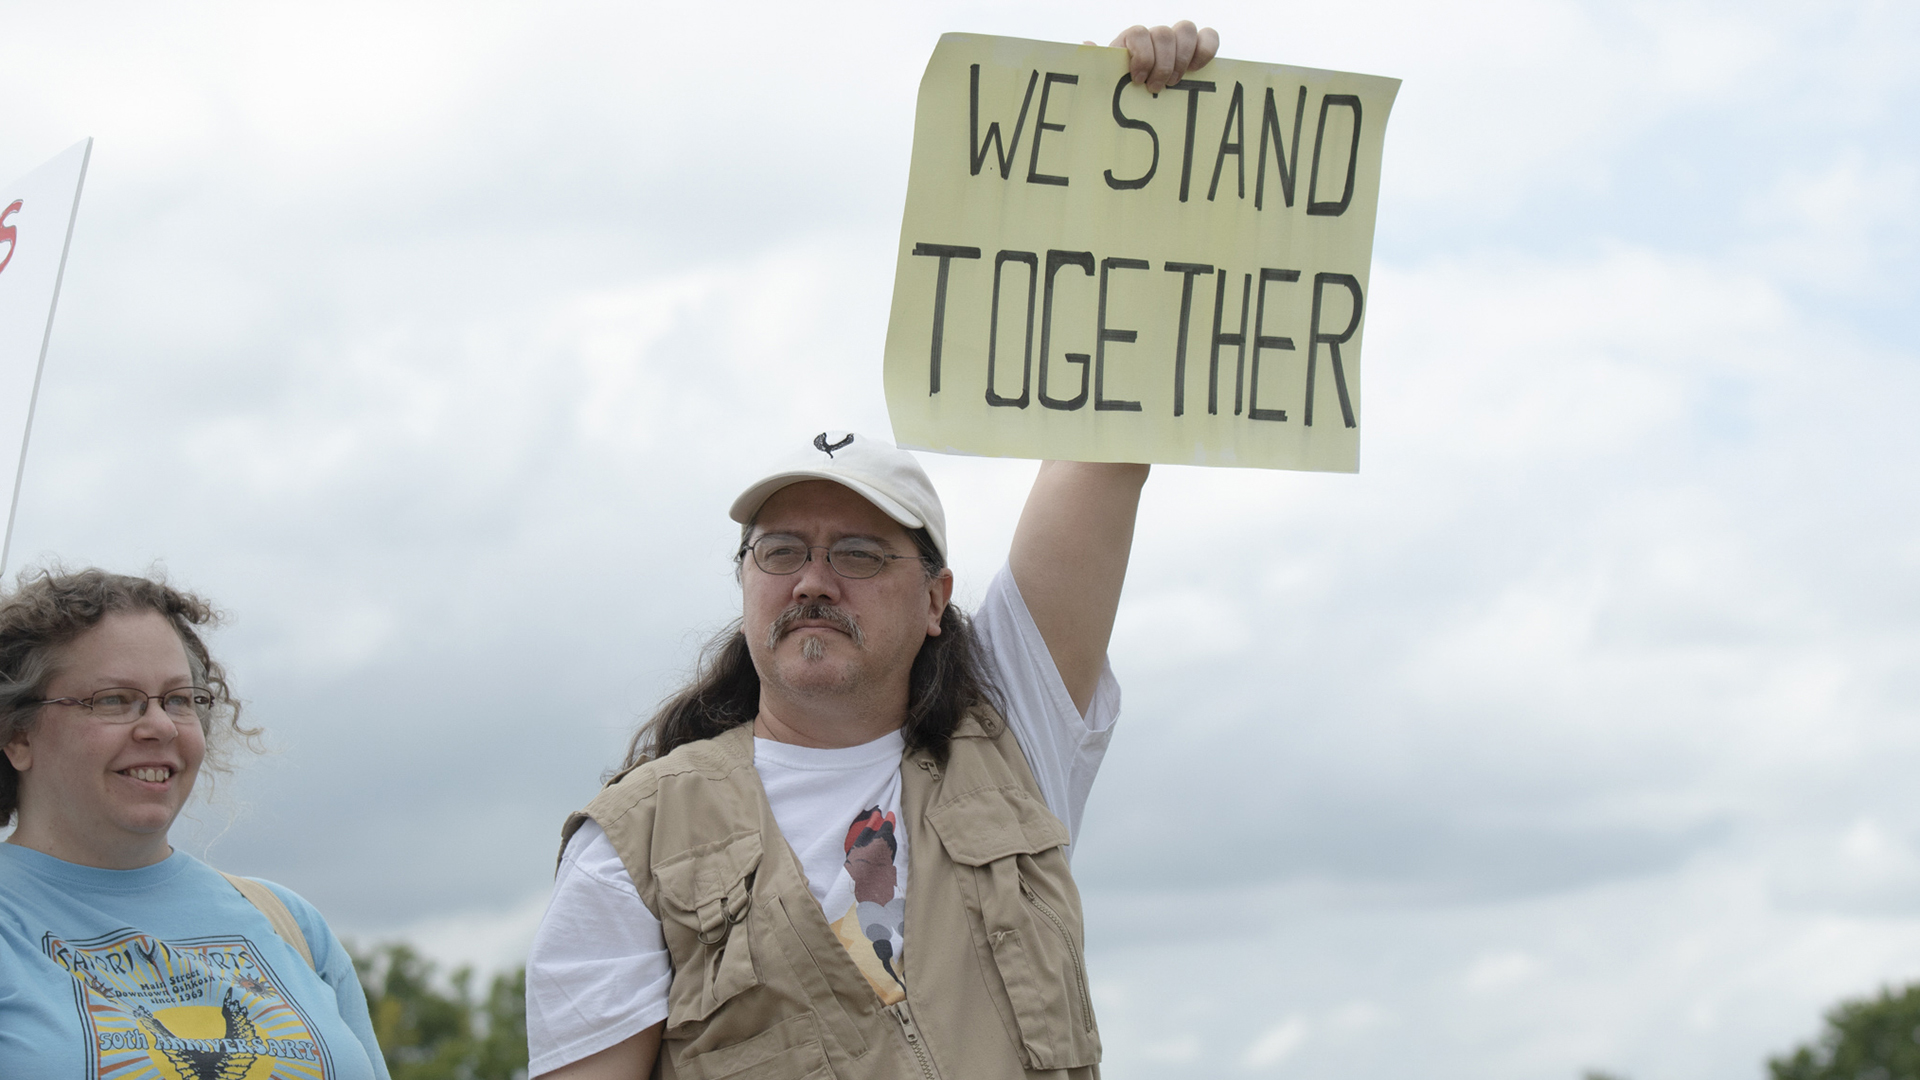 Bob Knudsen holds a hand-drawn sign reading "We Stand Together" above his head while standing next to Lori Knudsen.